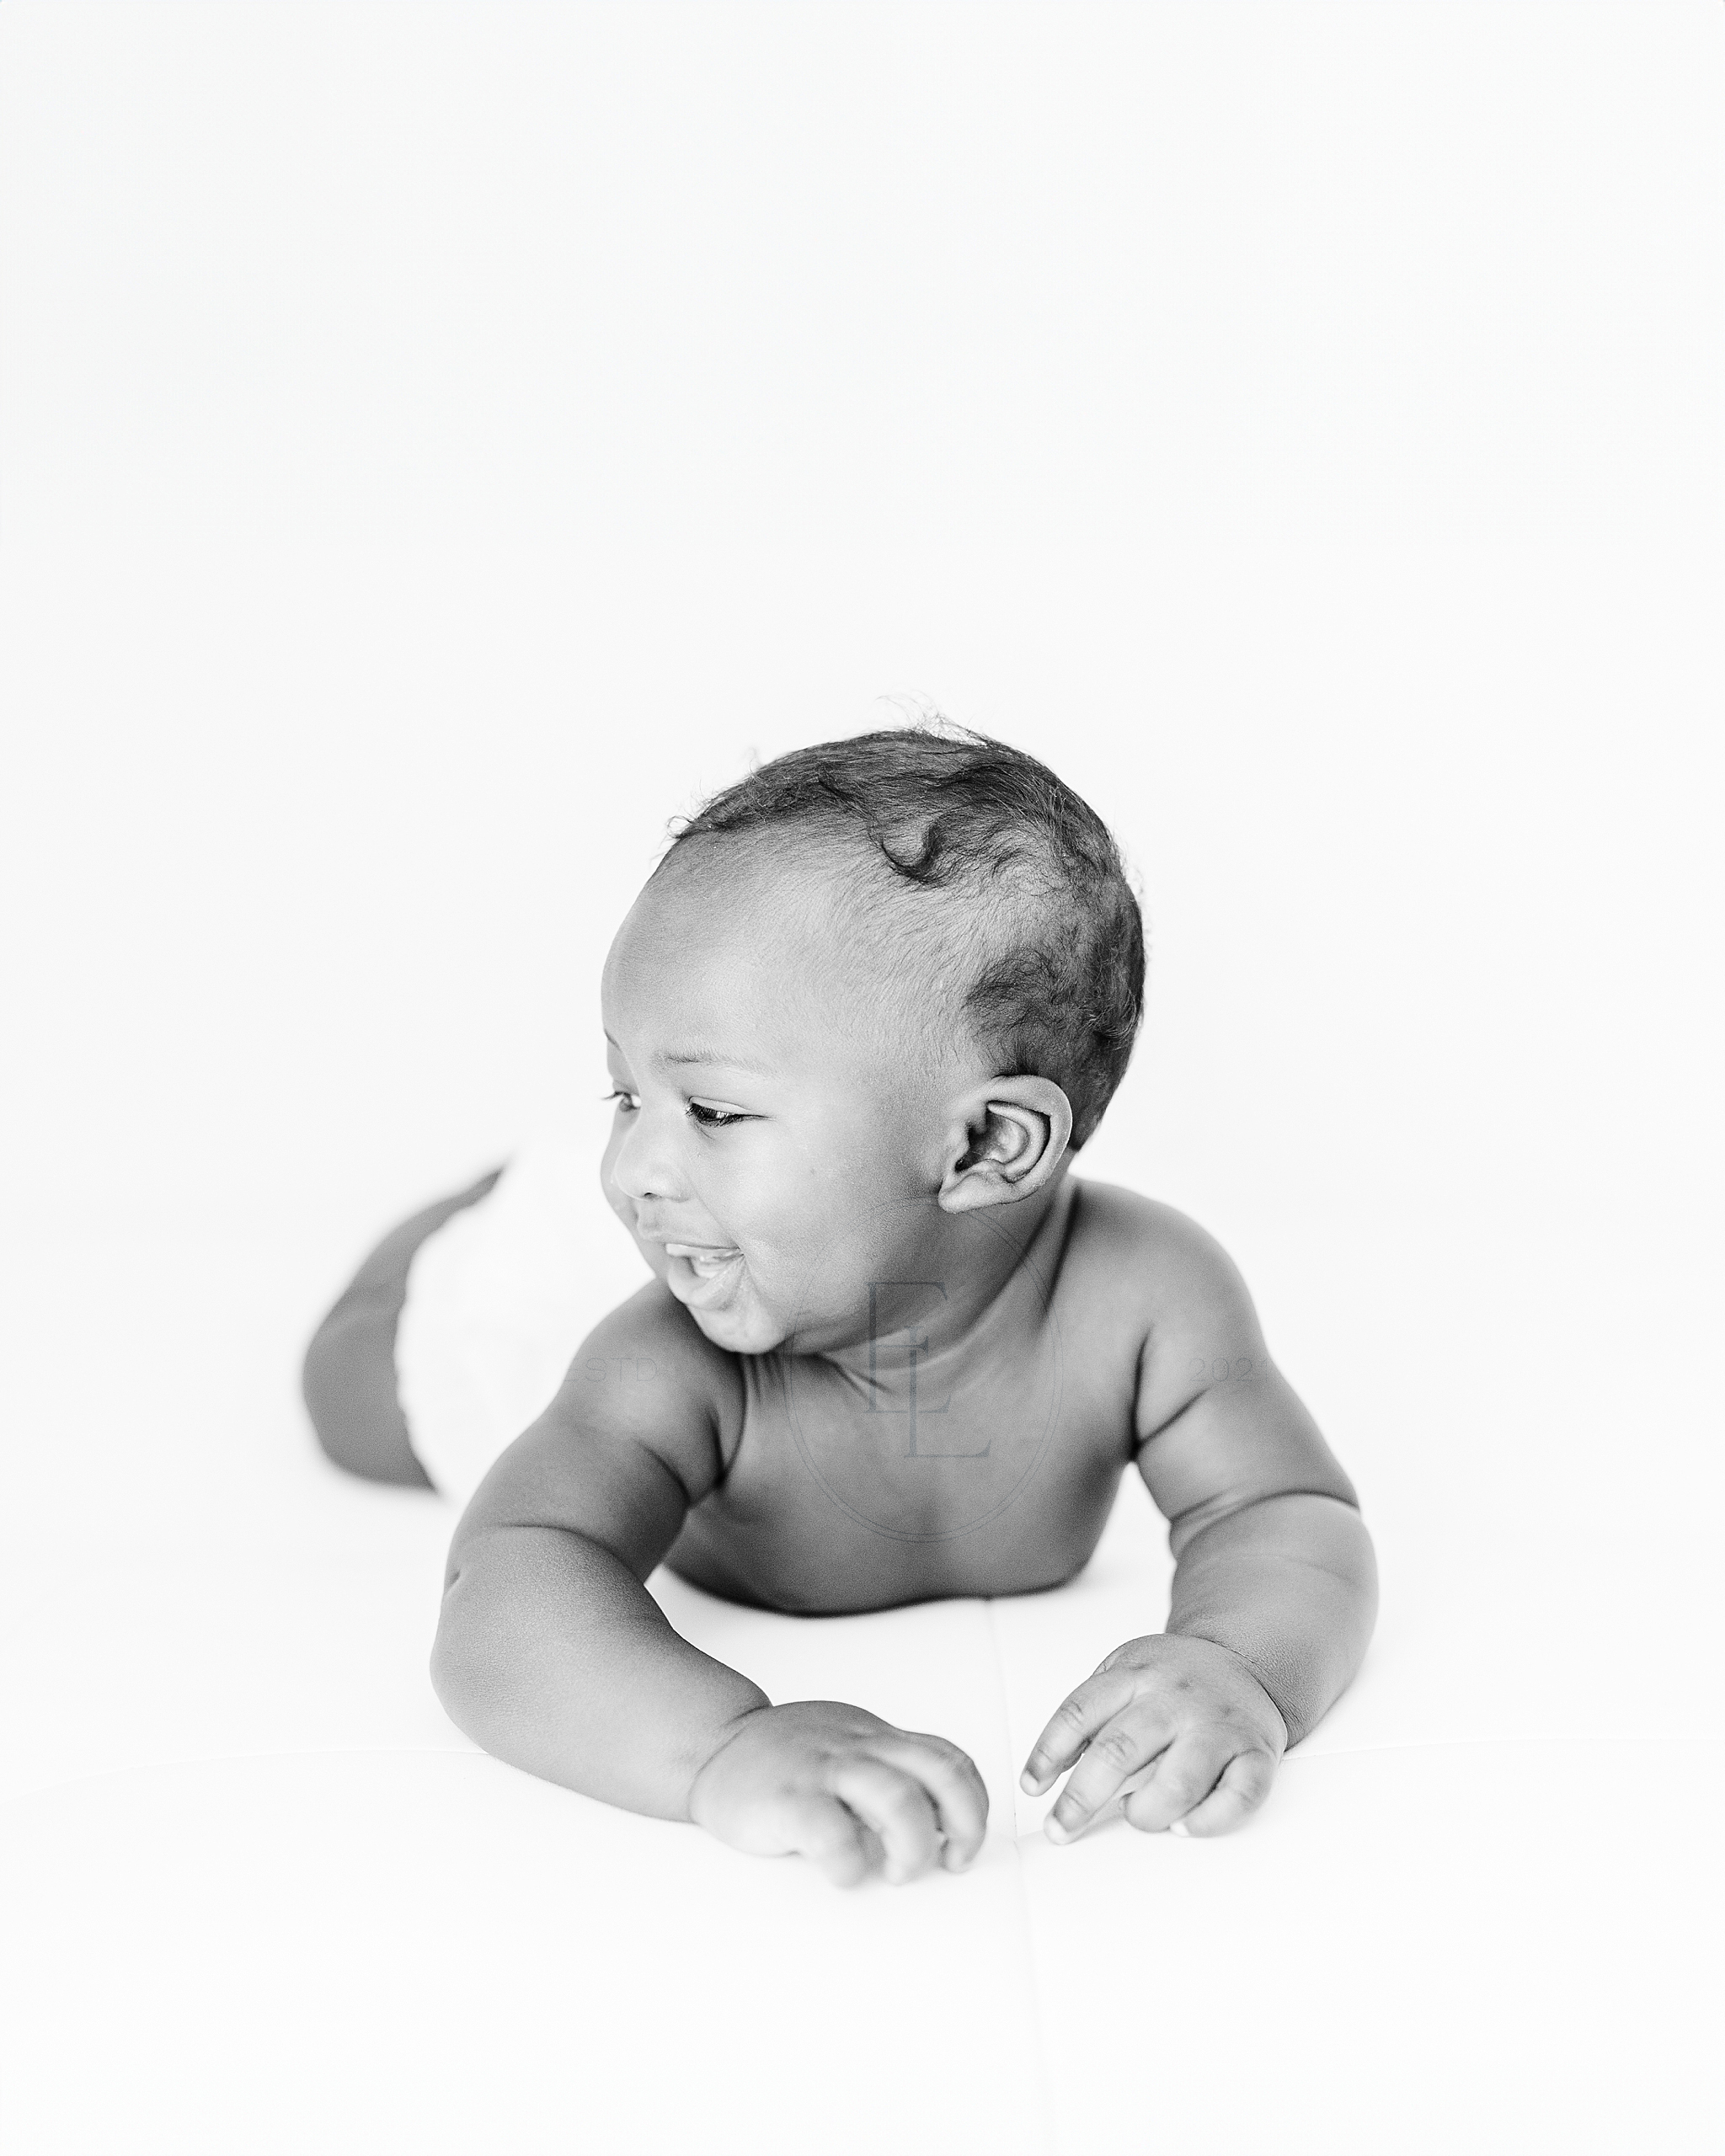 A 6 month old baby boy grins off to the side during his milestone session with Hattiesburg baby photographer Emily Lofton.